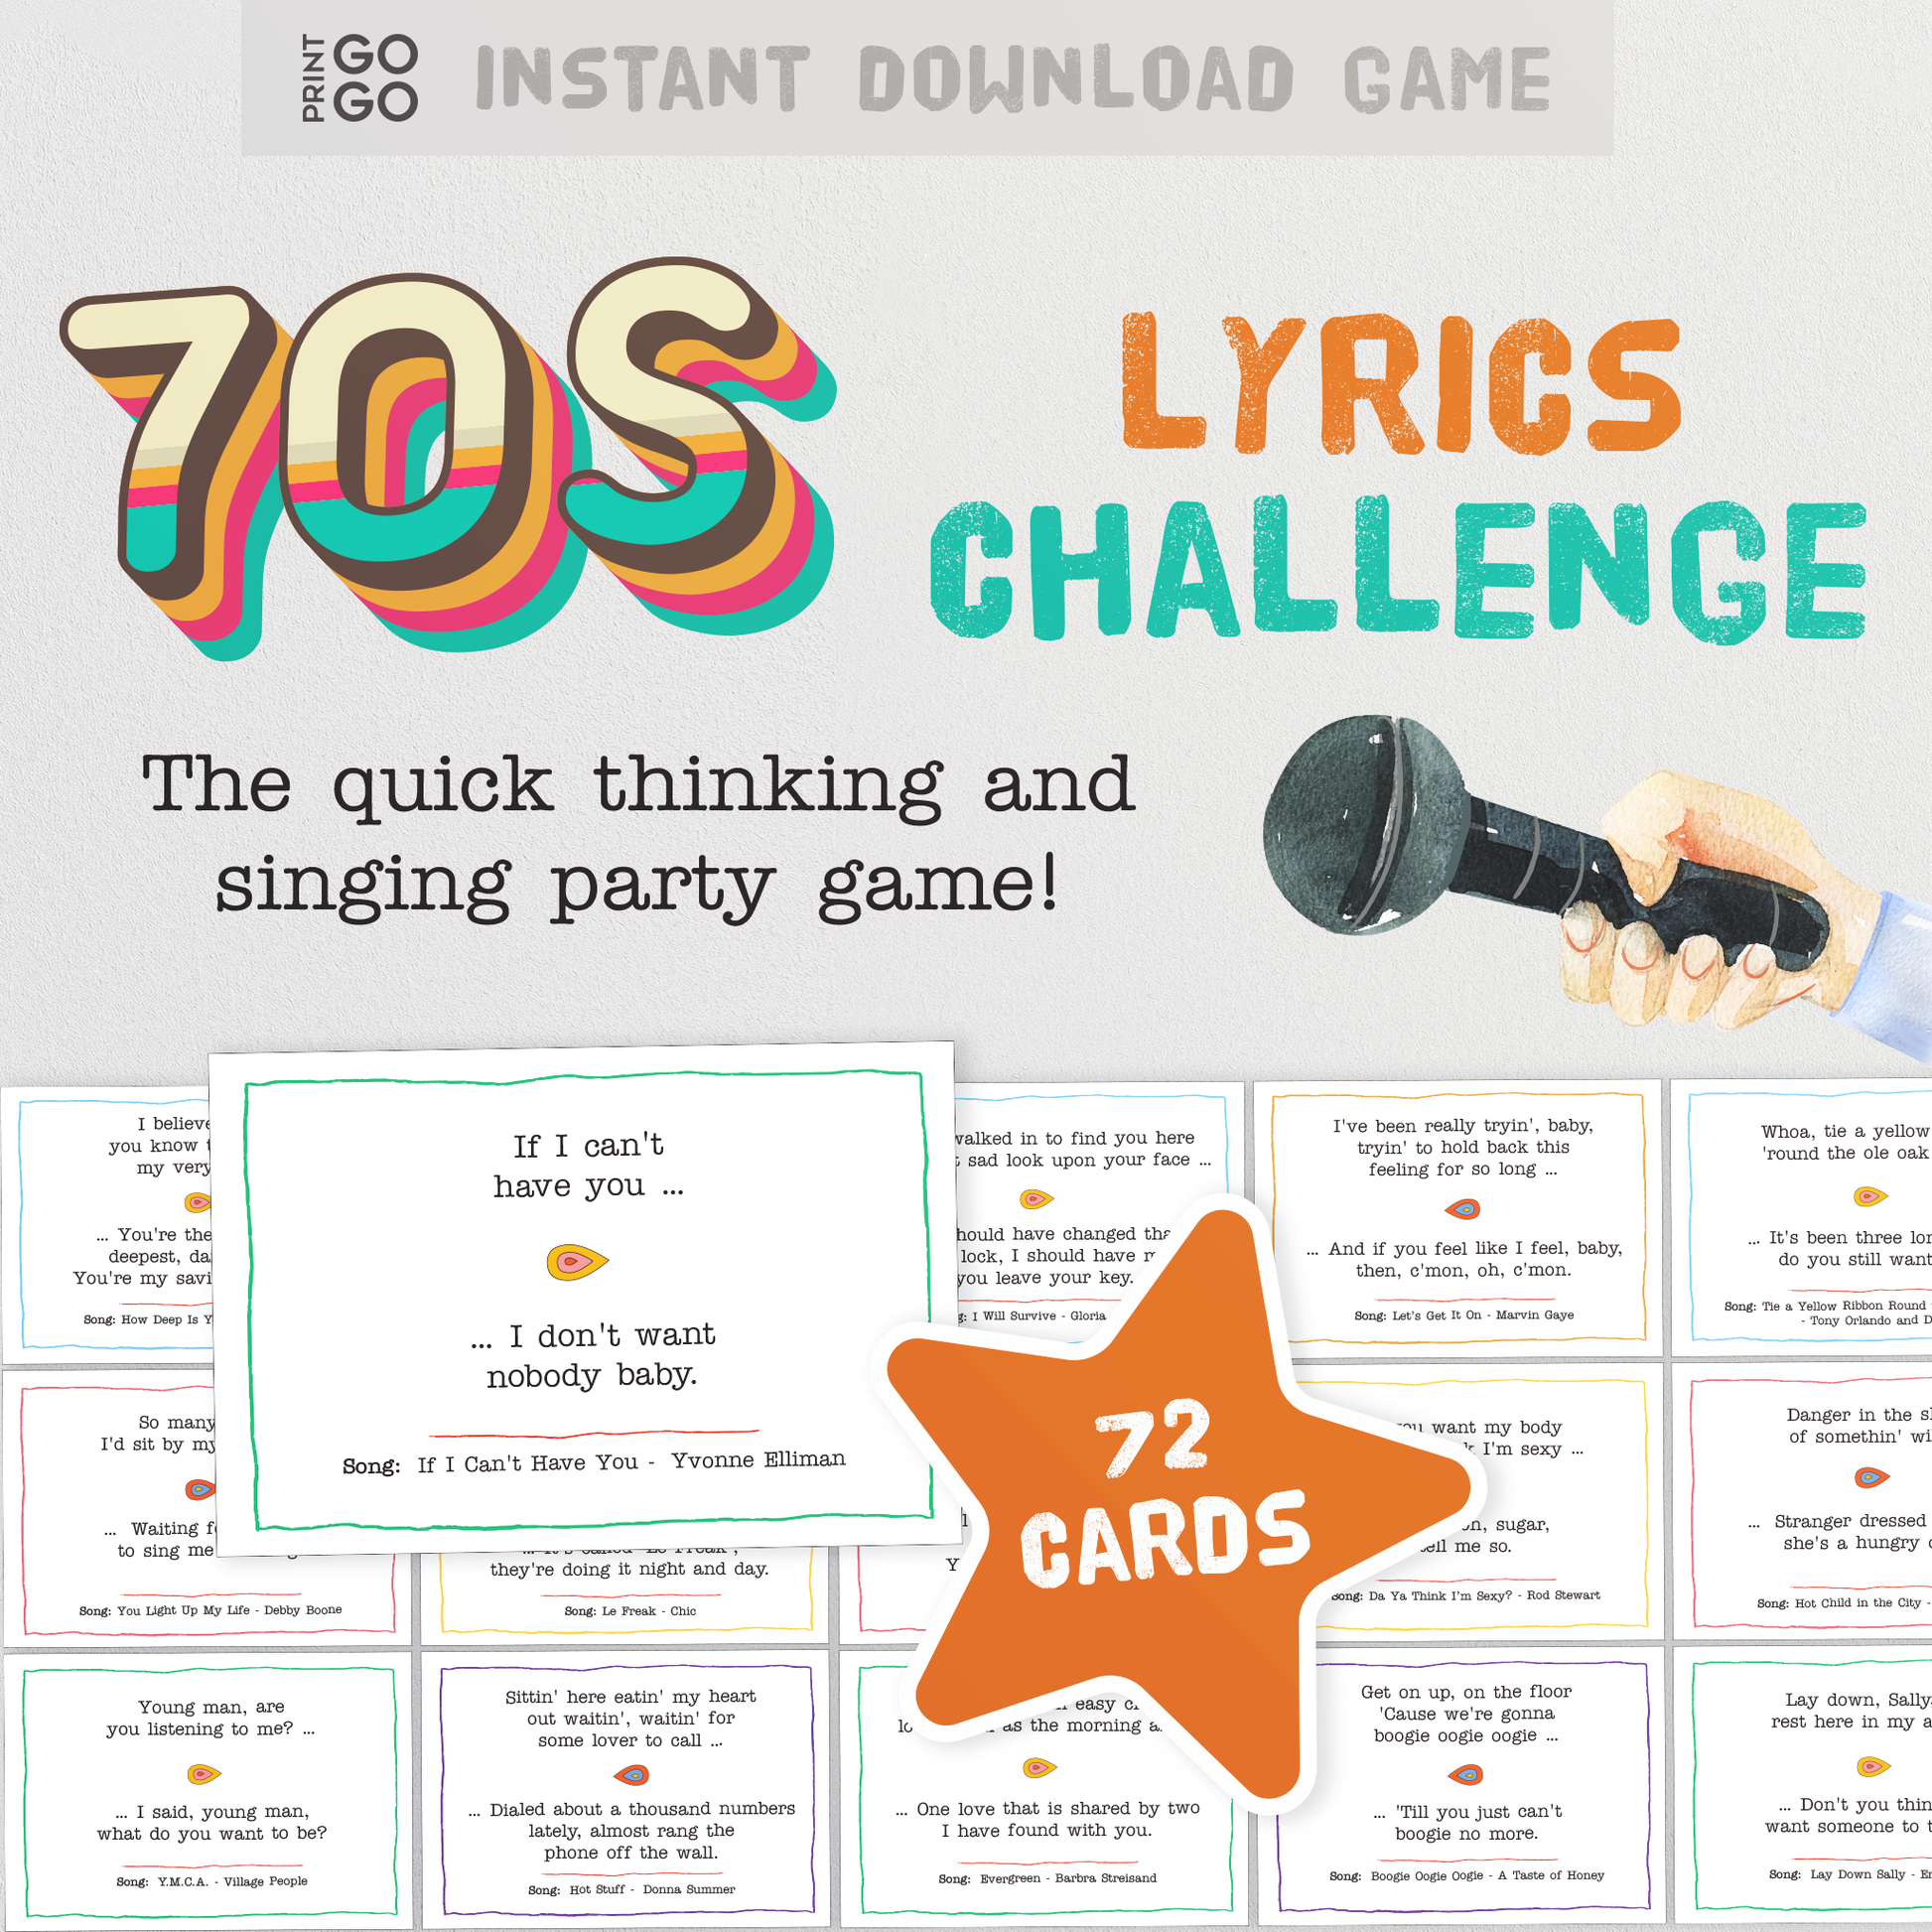 70s Songs Lyrics Challenge Game - The Quick Thinking and Singing Family Party Game